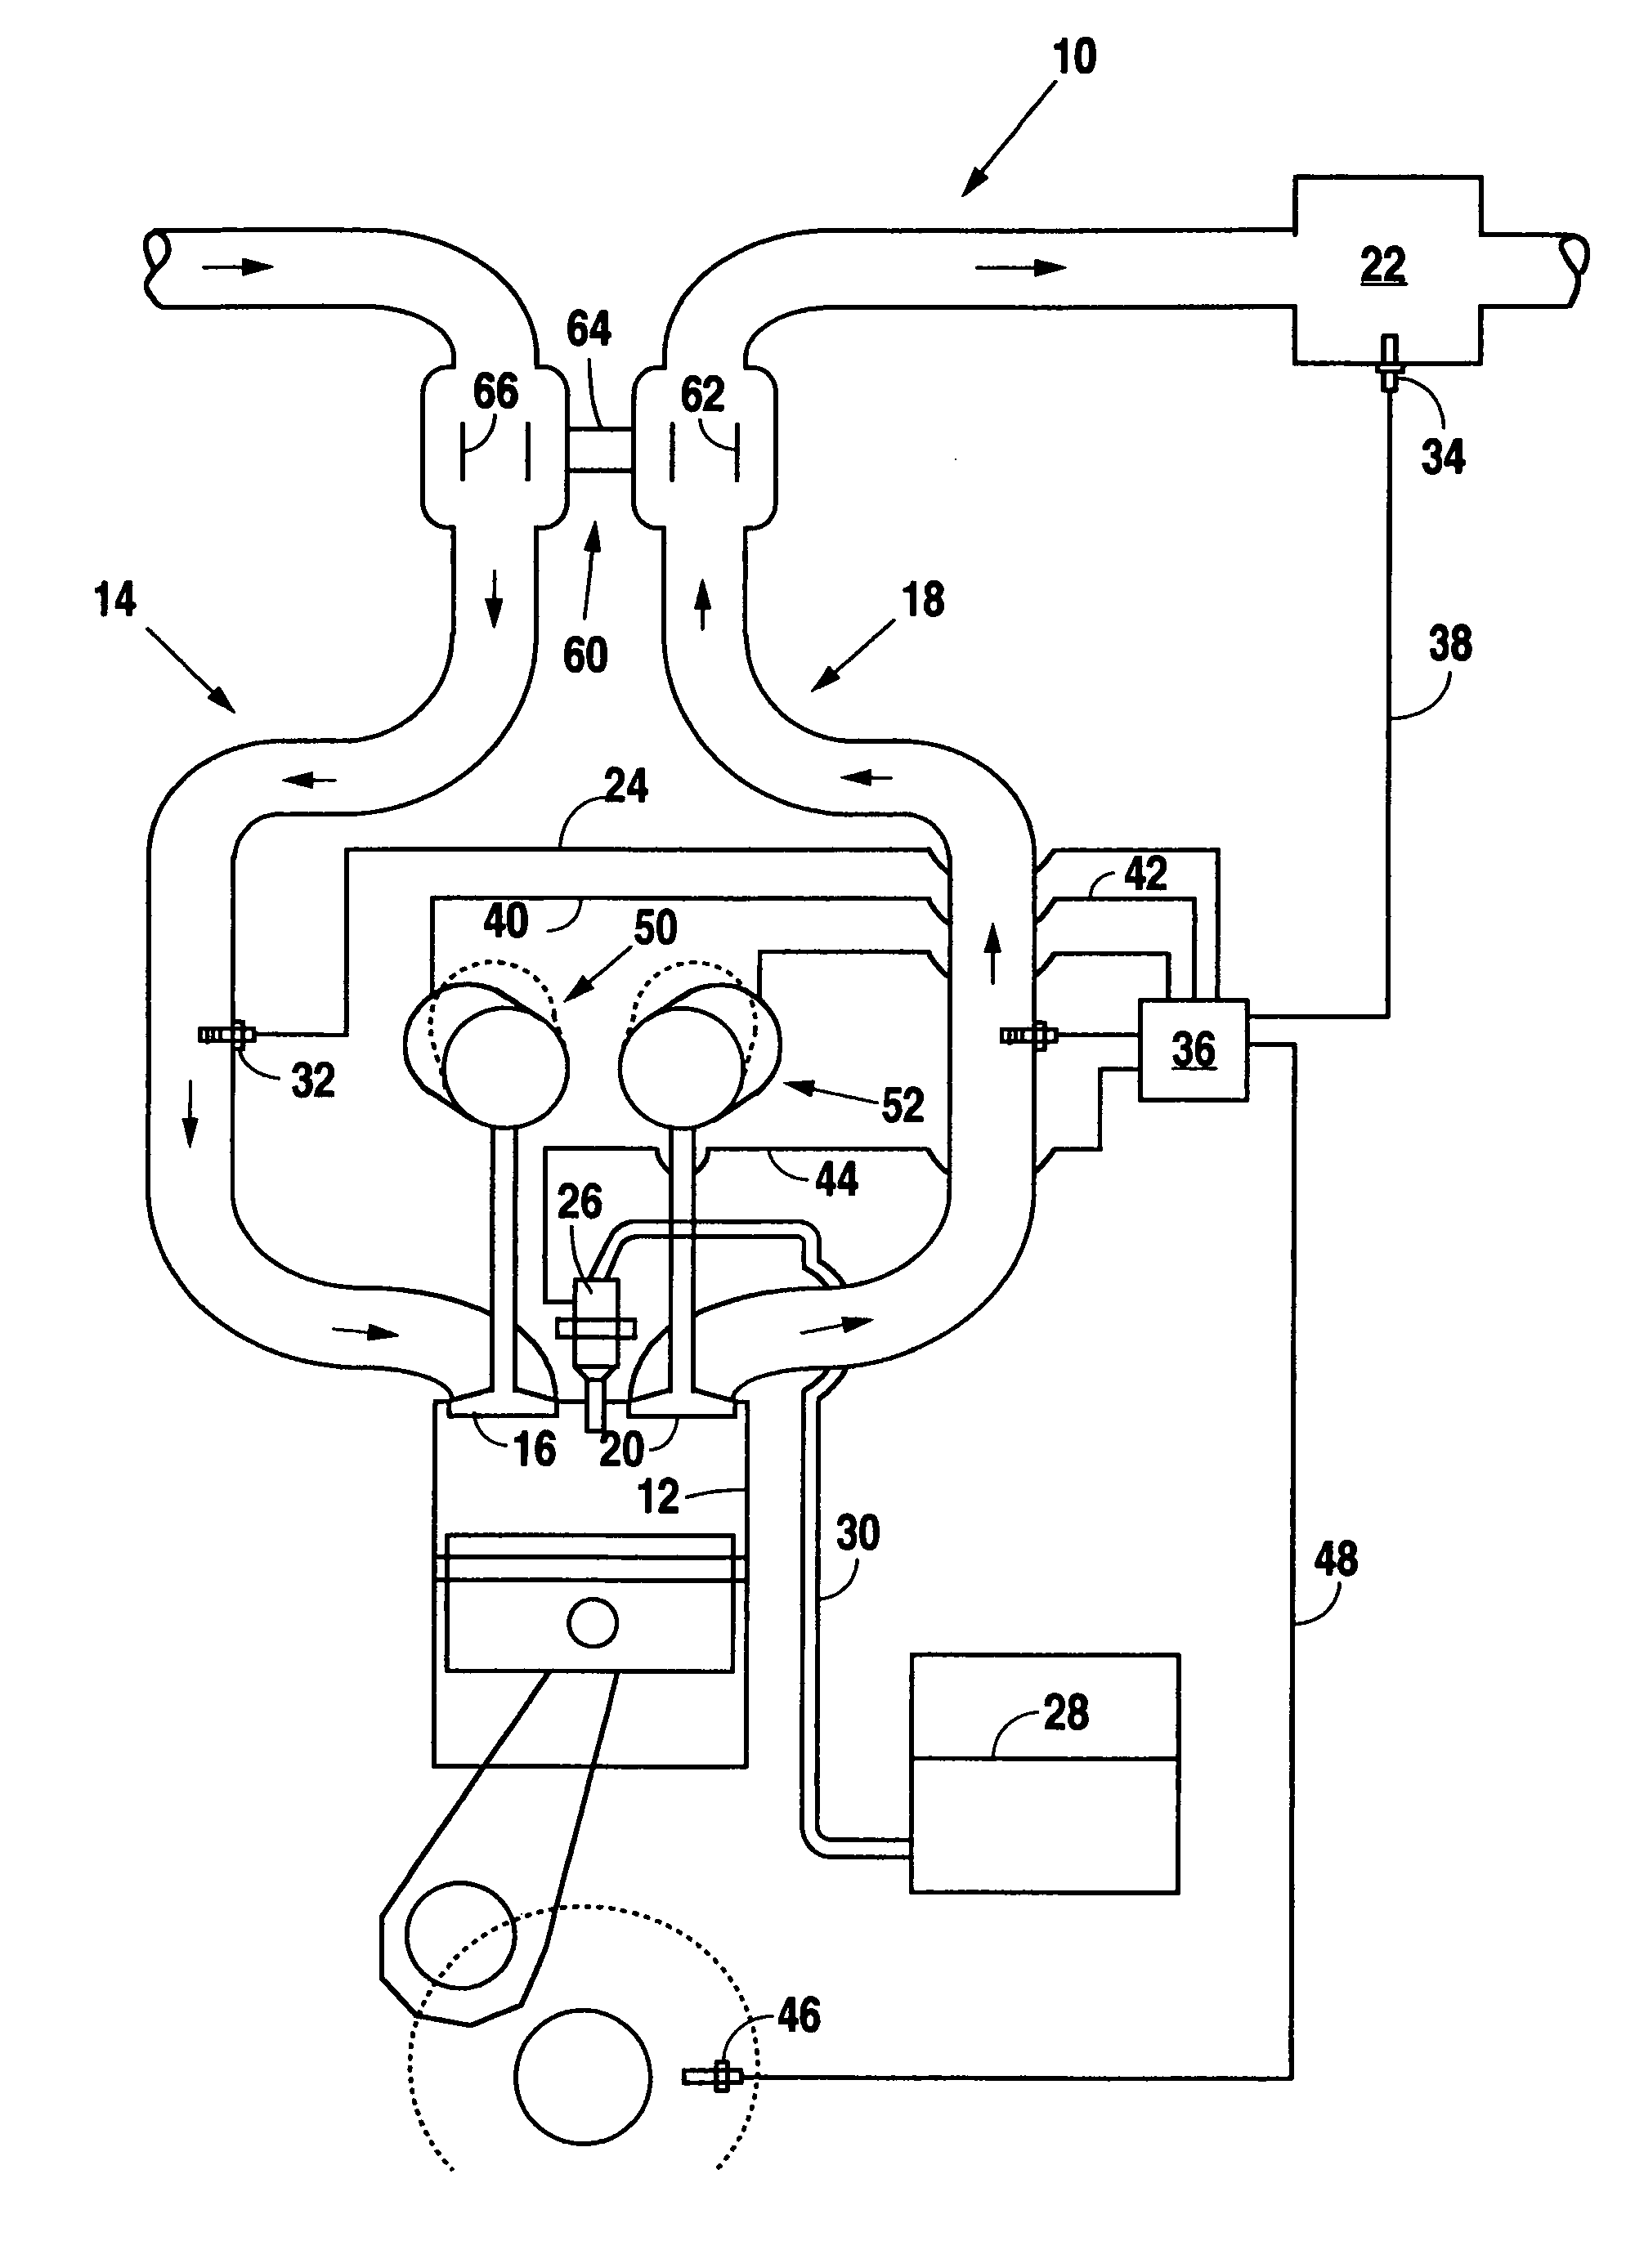 Method for controlling exhaust gas temperature and space velocity during regeneration to protect temperature sensitive diesel engine components and aftertreatment devices